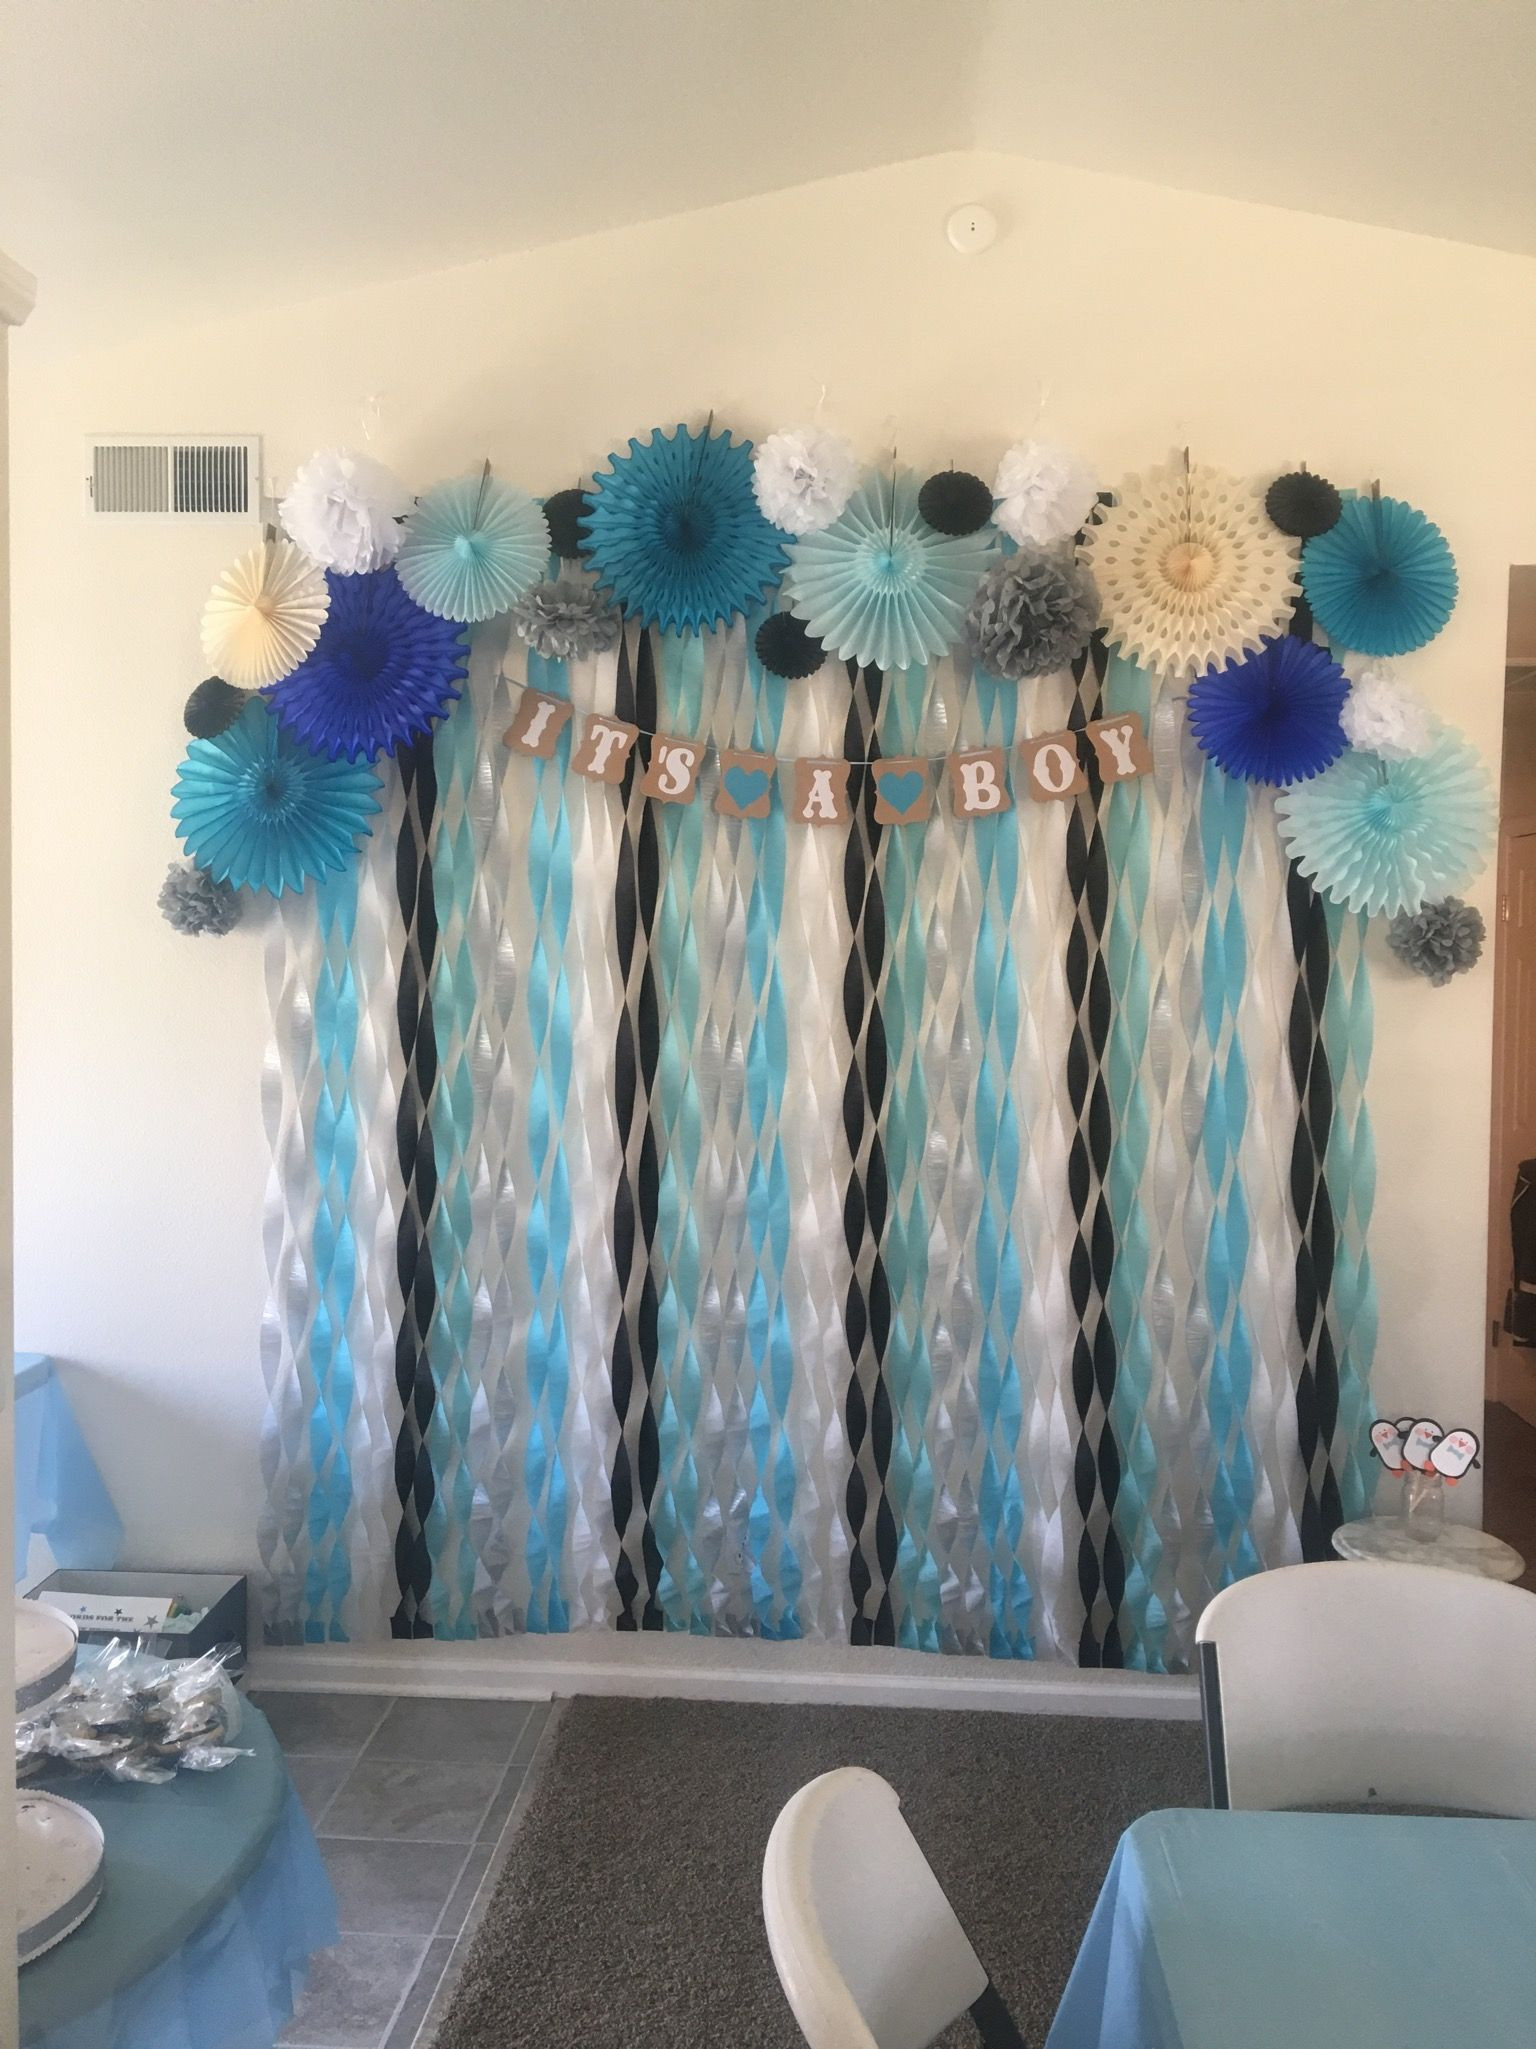 Baby Boy Baby Shower Decor
 Penguin Themed Baby Shower backdrop